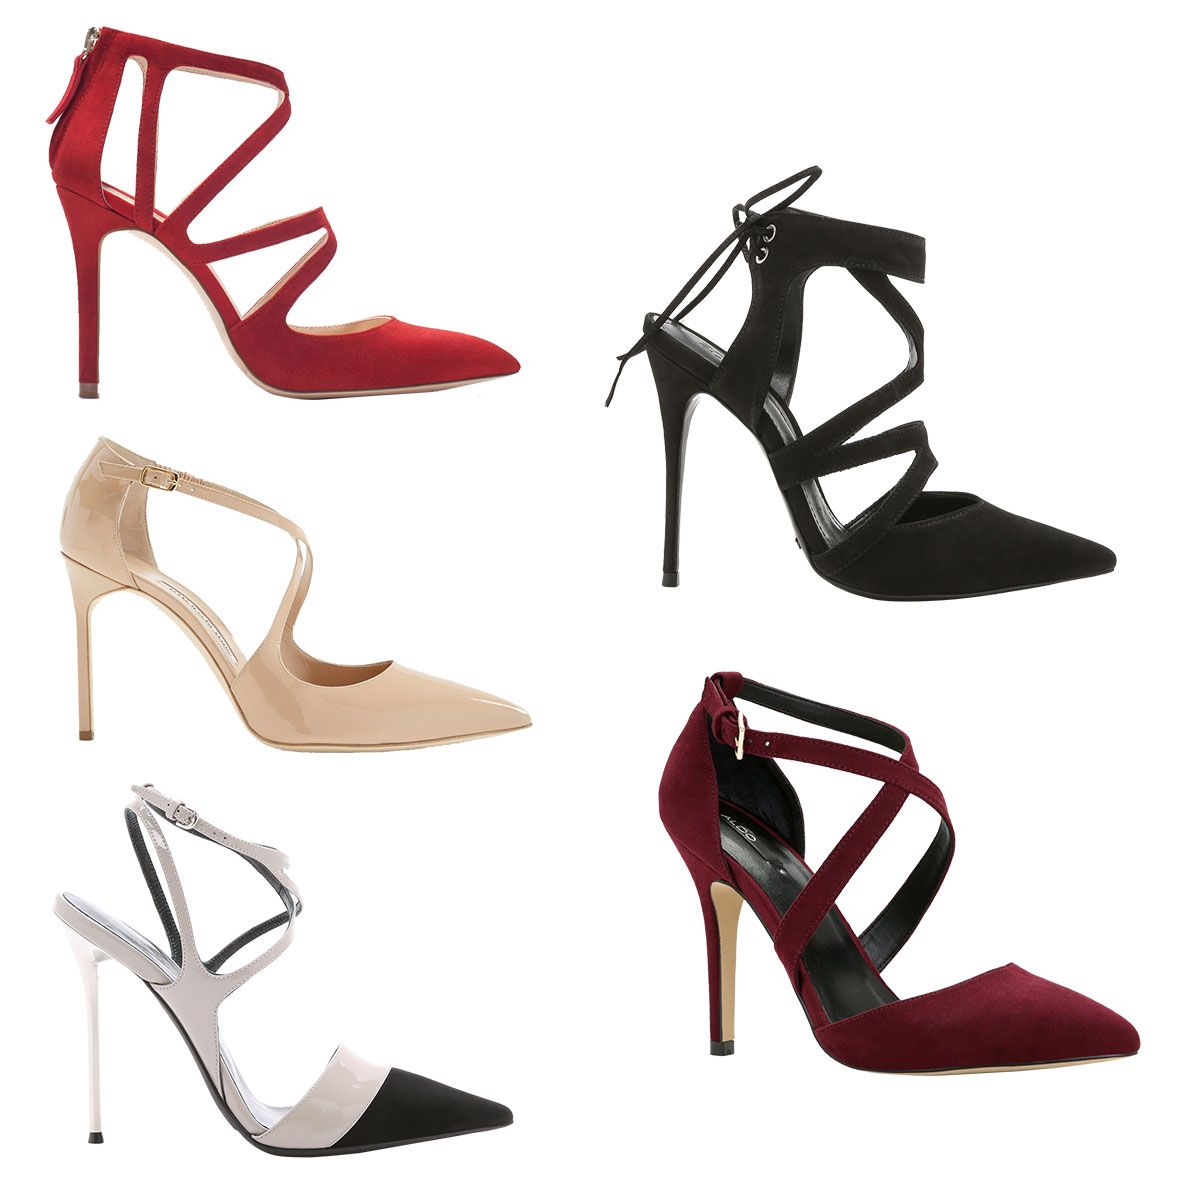 Boss-Lady Pumps - The 50 Chicest Shoes to Wear This Fall - The Cut